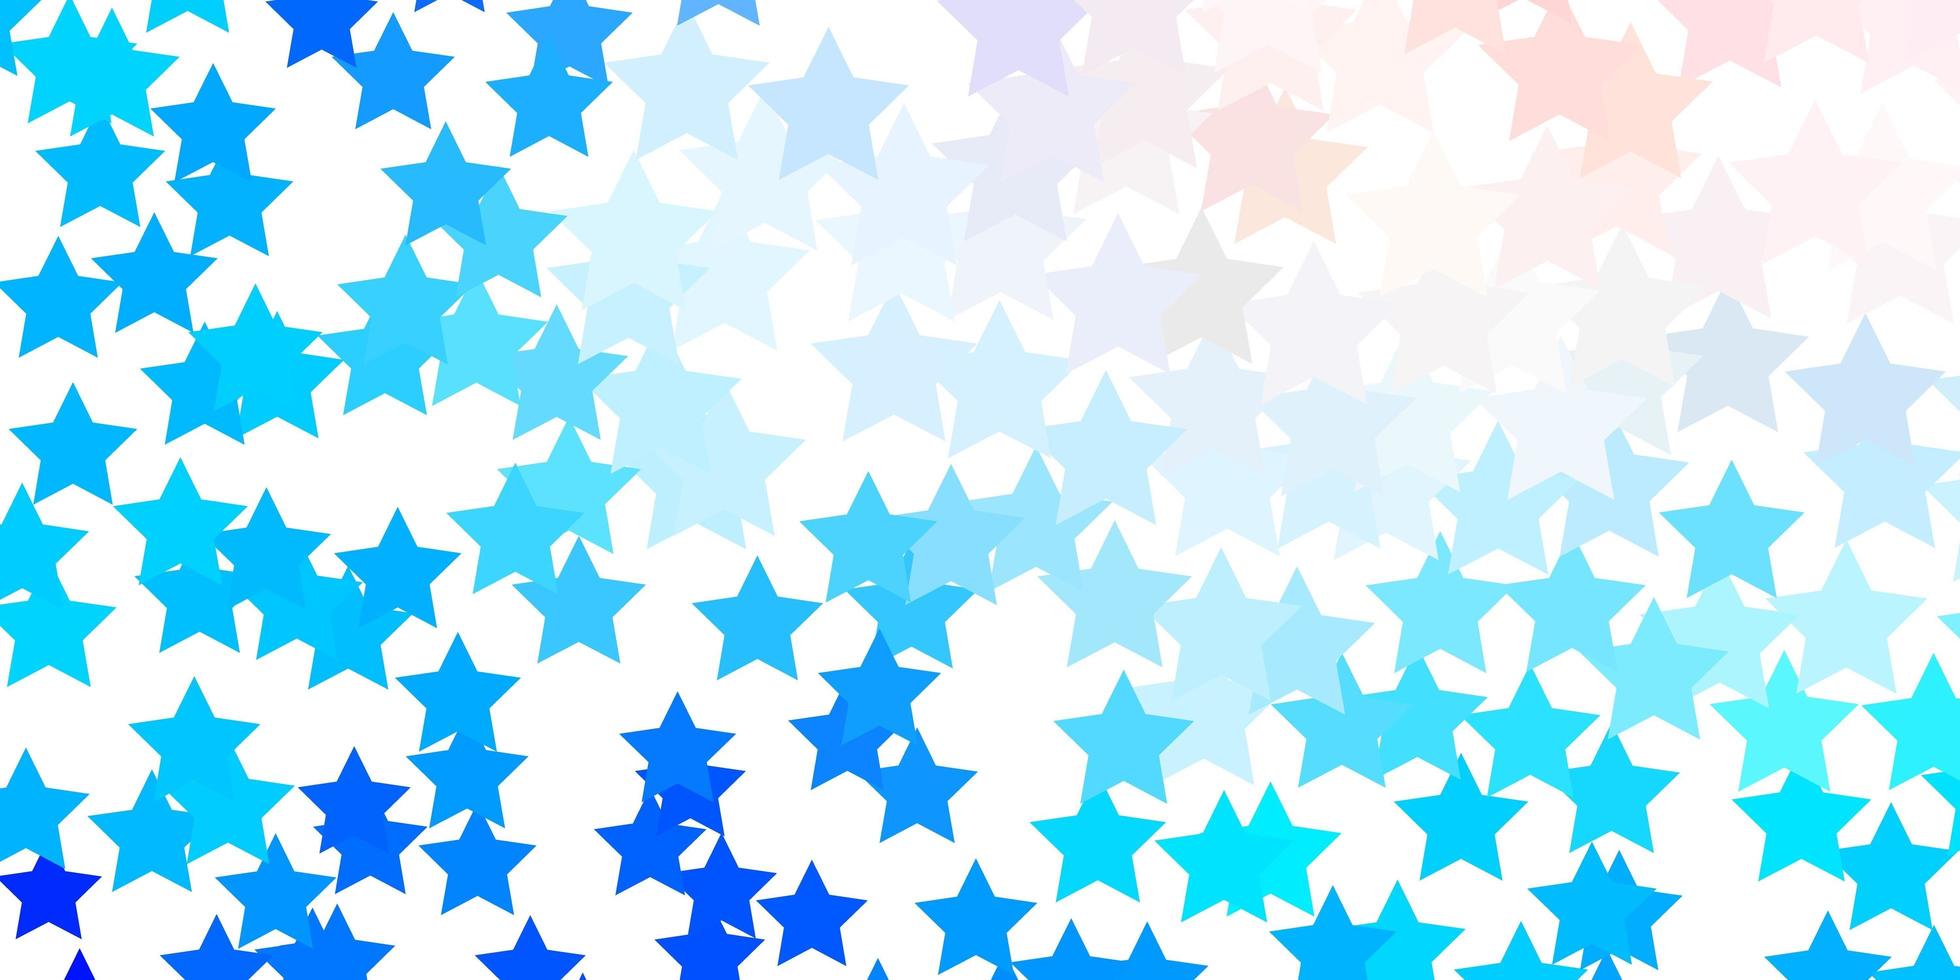 Light Pink, Blue vector pattern with abstract stars. Decorative illustration with stars on abstract template. Pattern for new year ad, booklets.